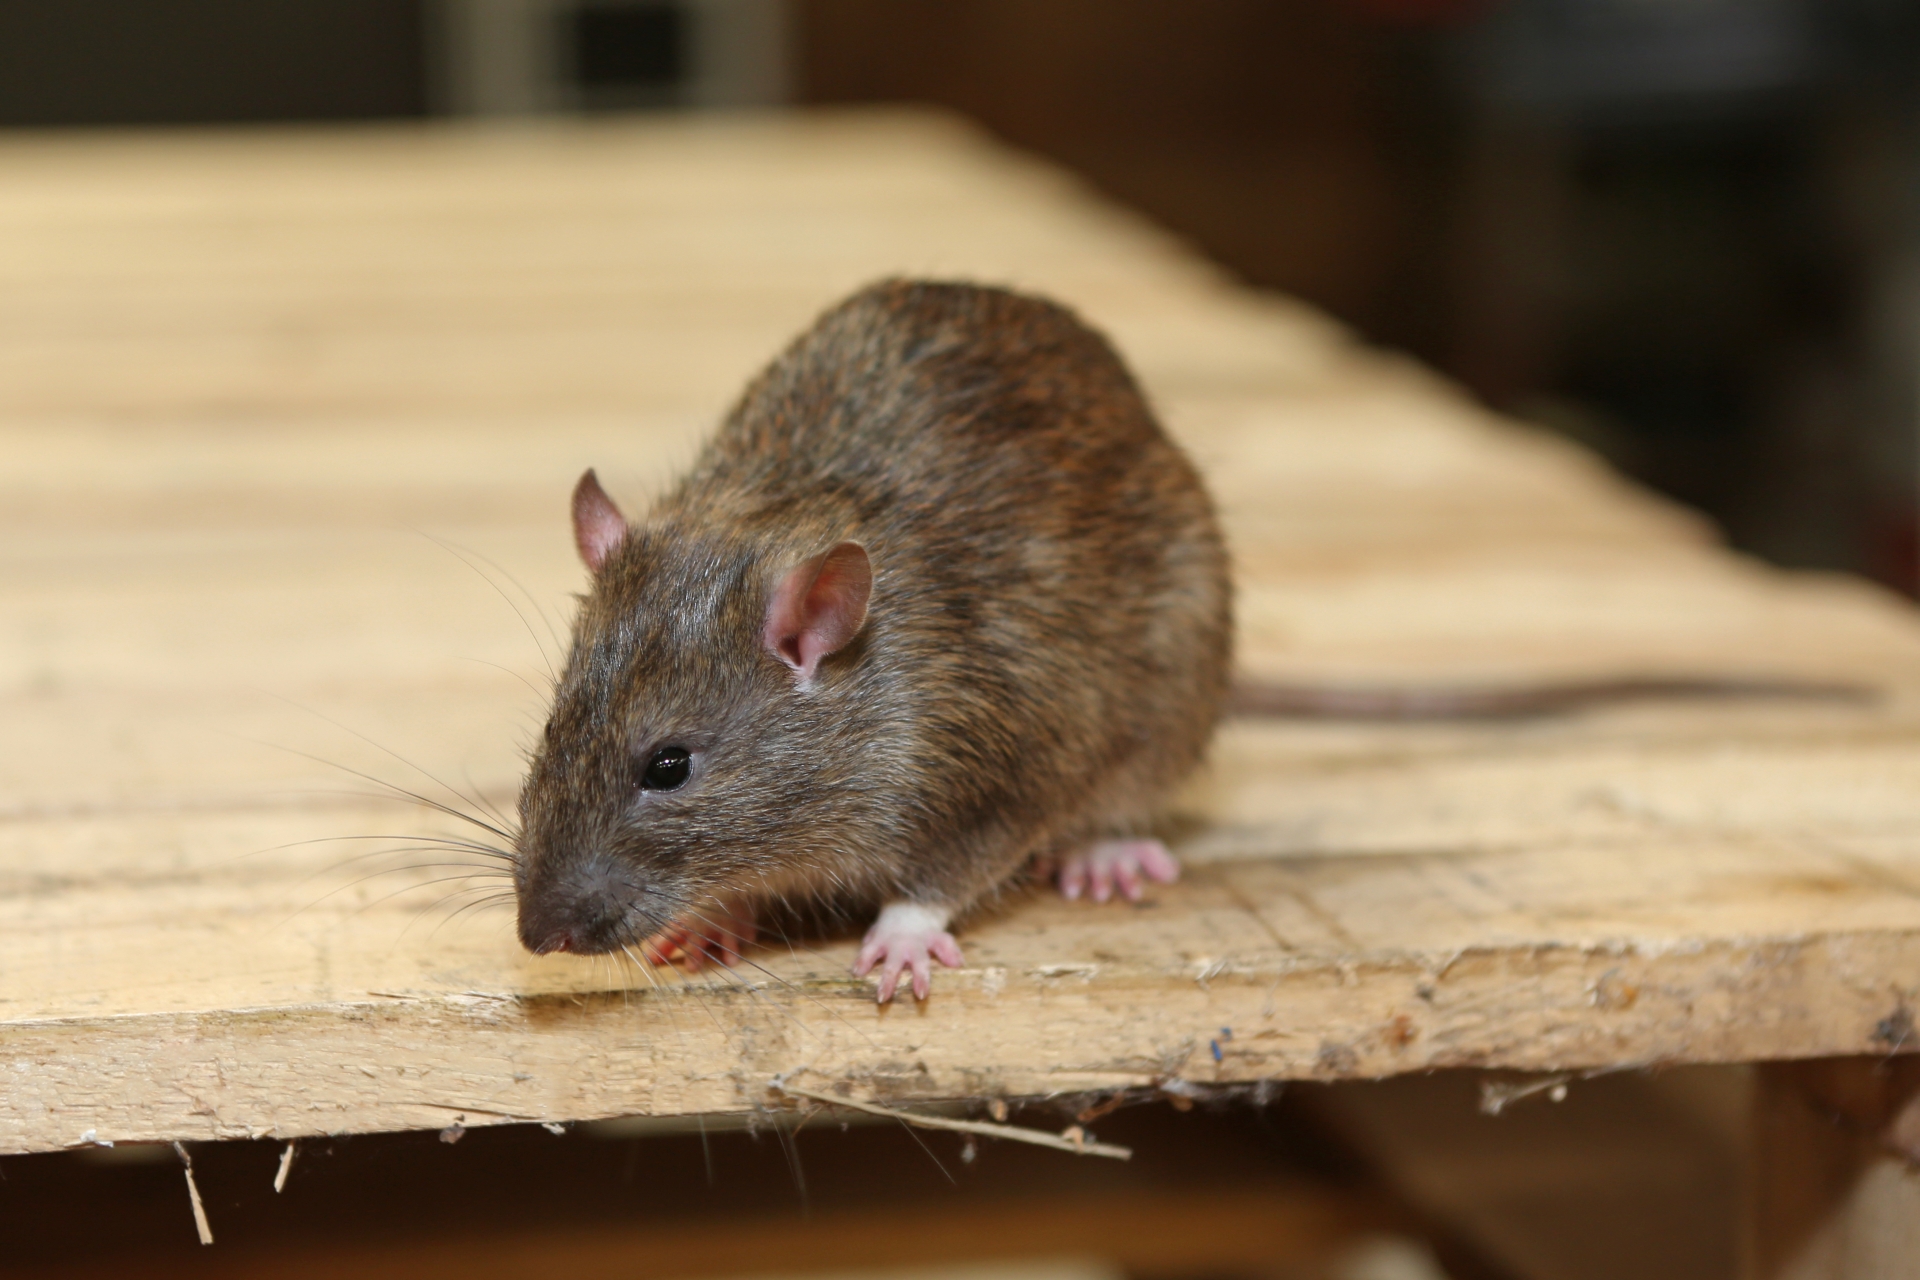 Rat extermination, Pest Control in North Cheam, Stonecot Hill, SM3. Call Now 020 8166 9746